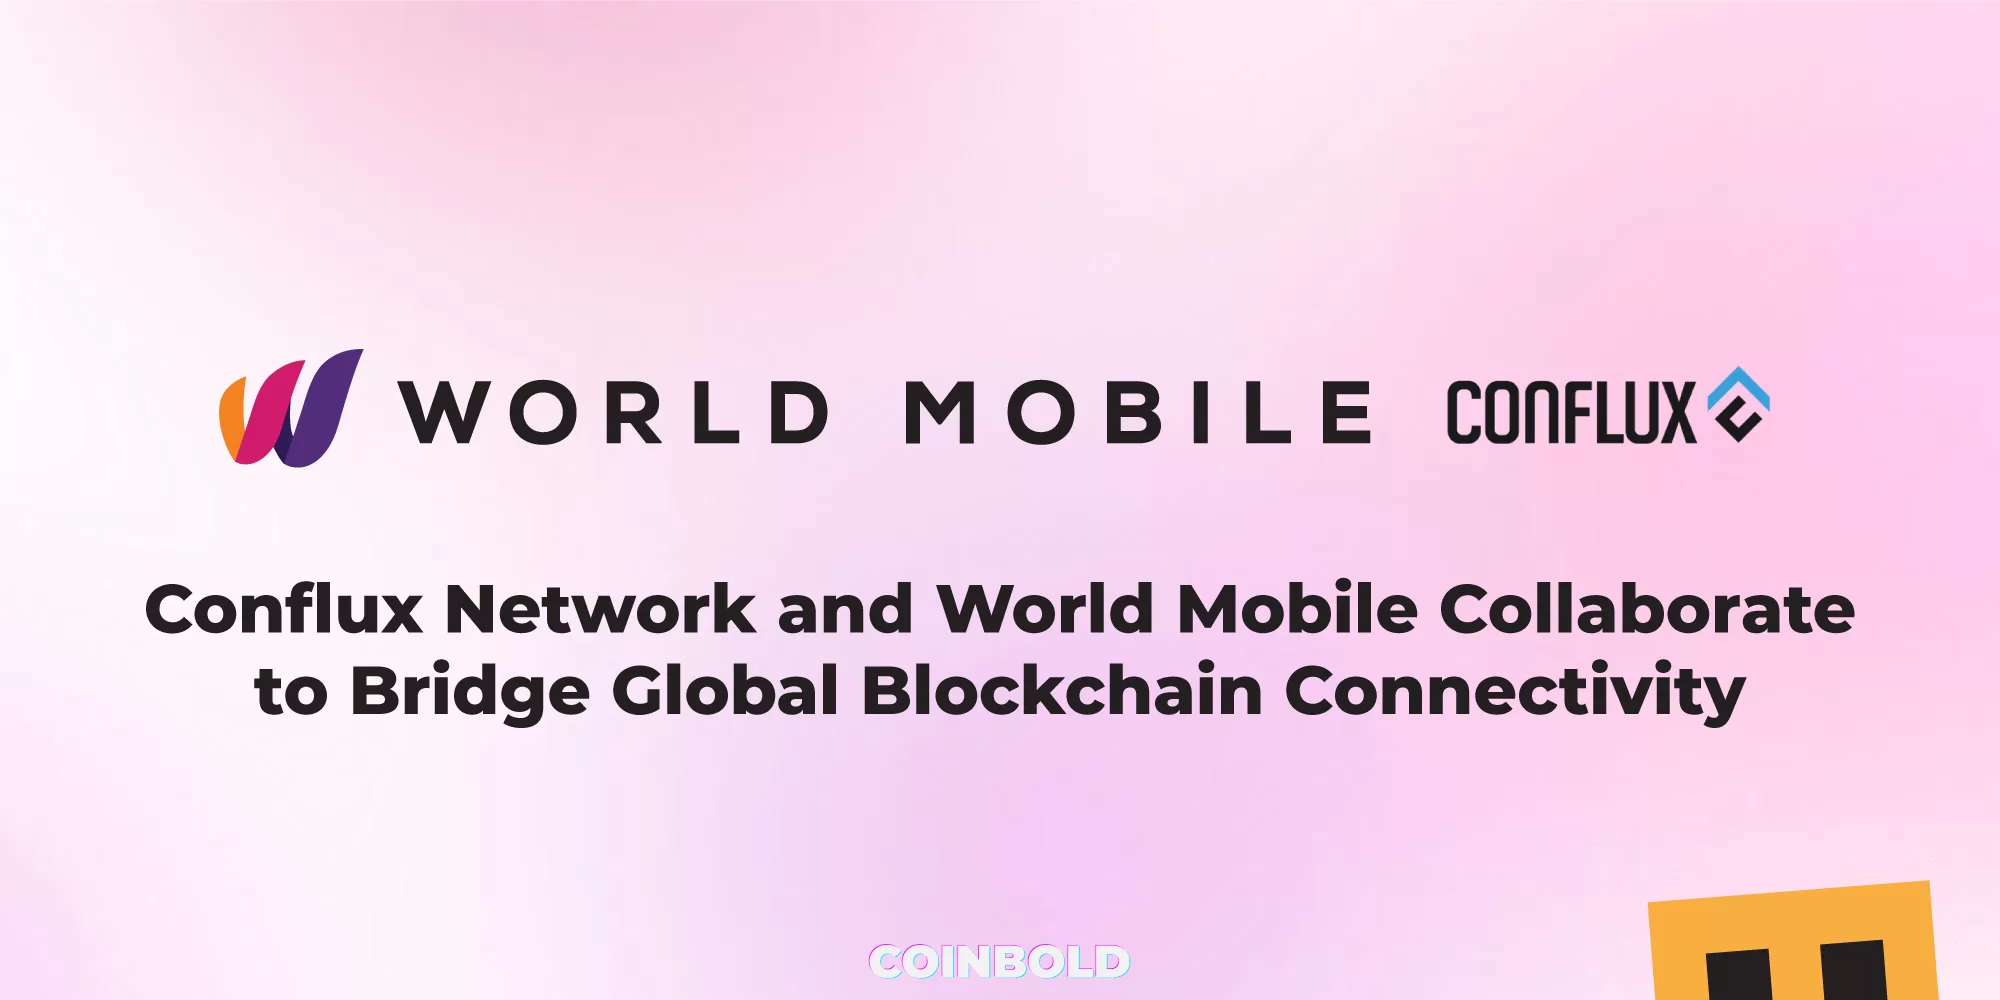 Conflux Network and World Mobile Collaborate to Bridge Global Blockchain Connectivity